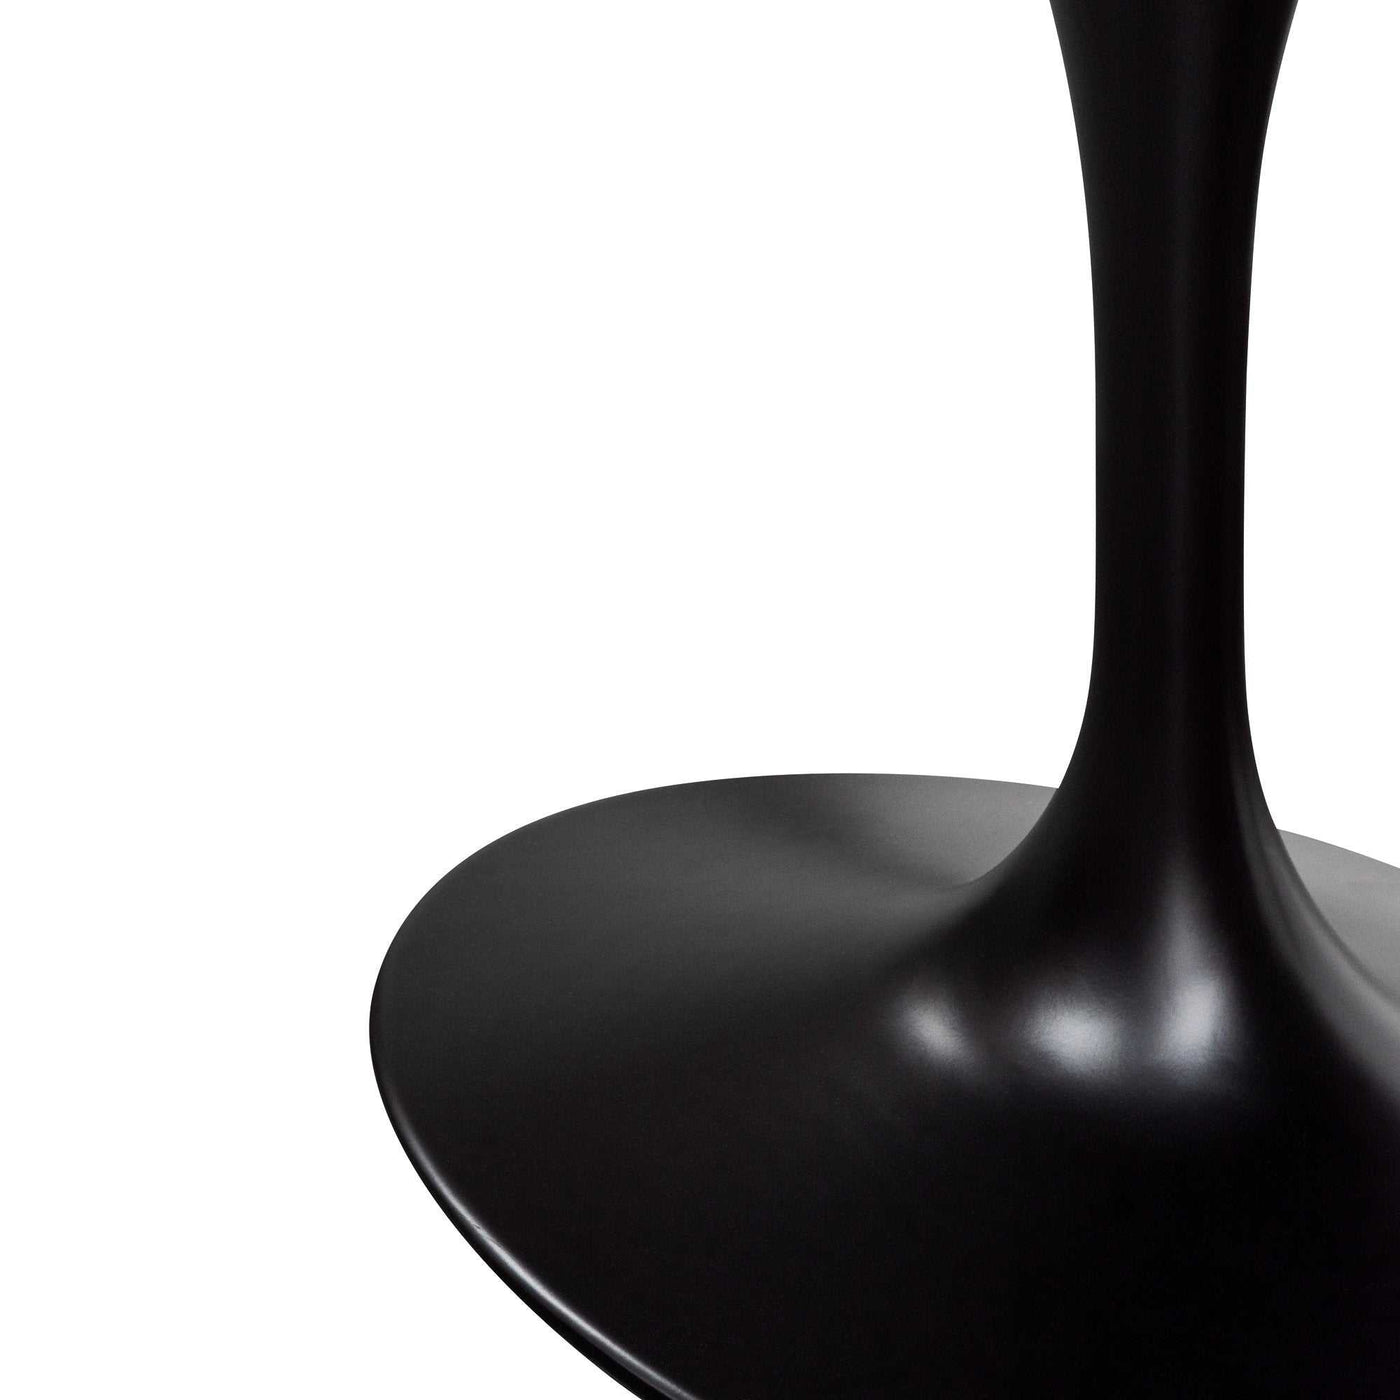 Oval 2m Marble Dining Table - Black Base